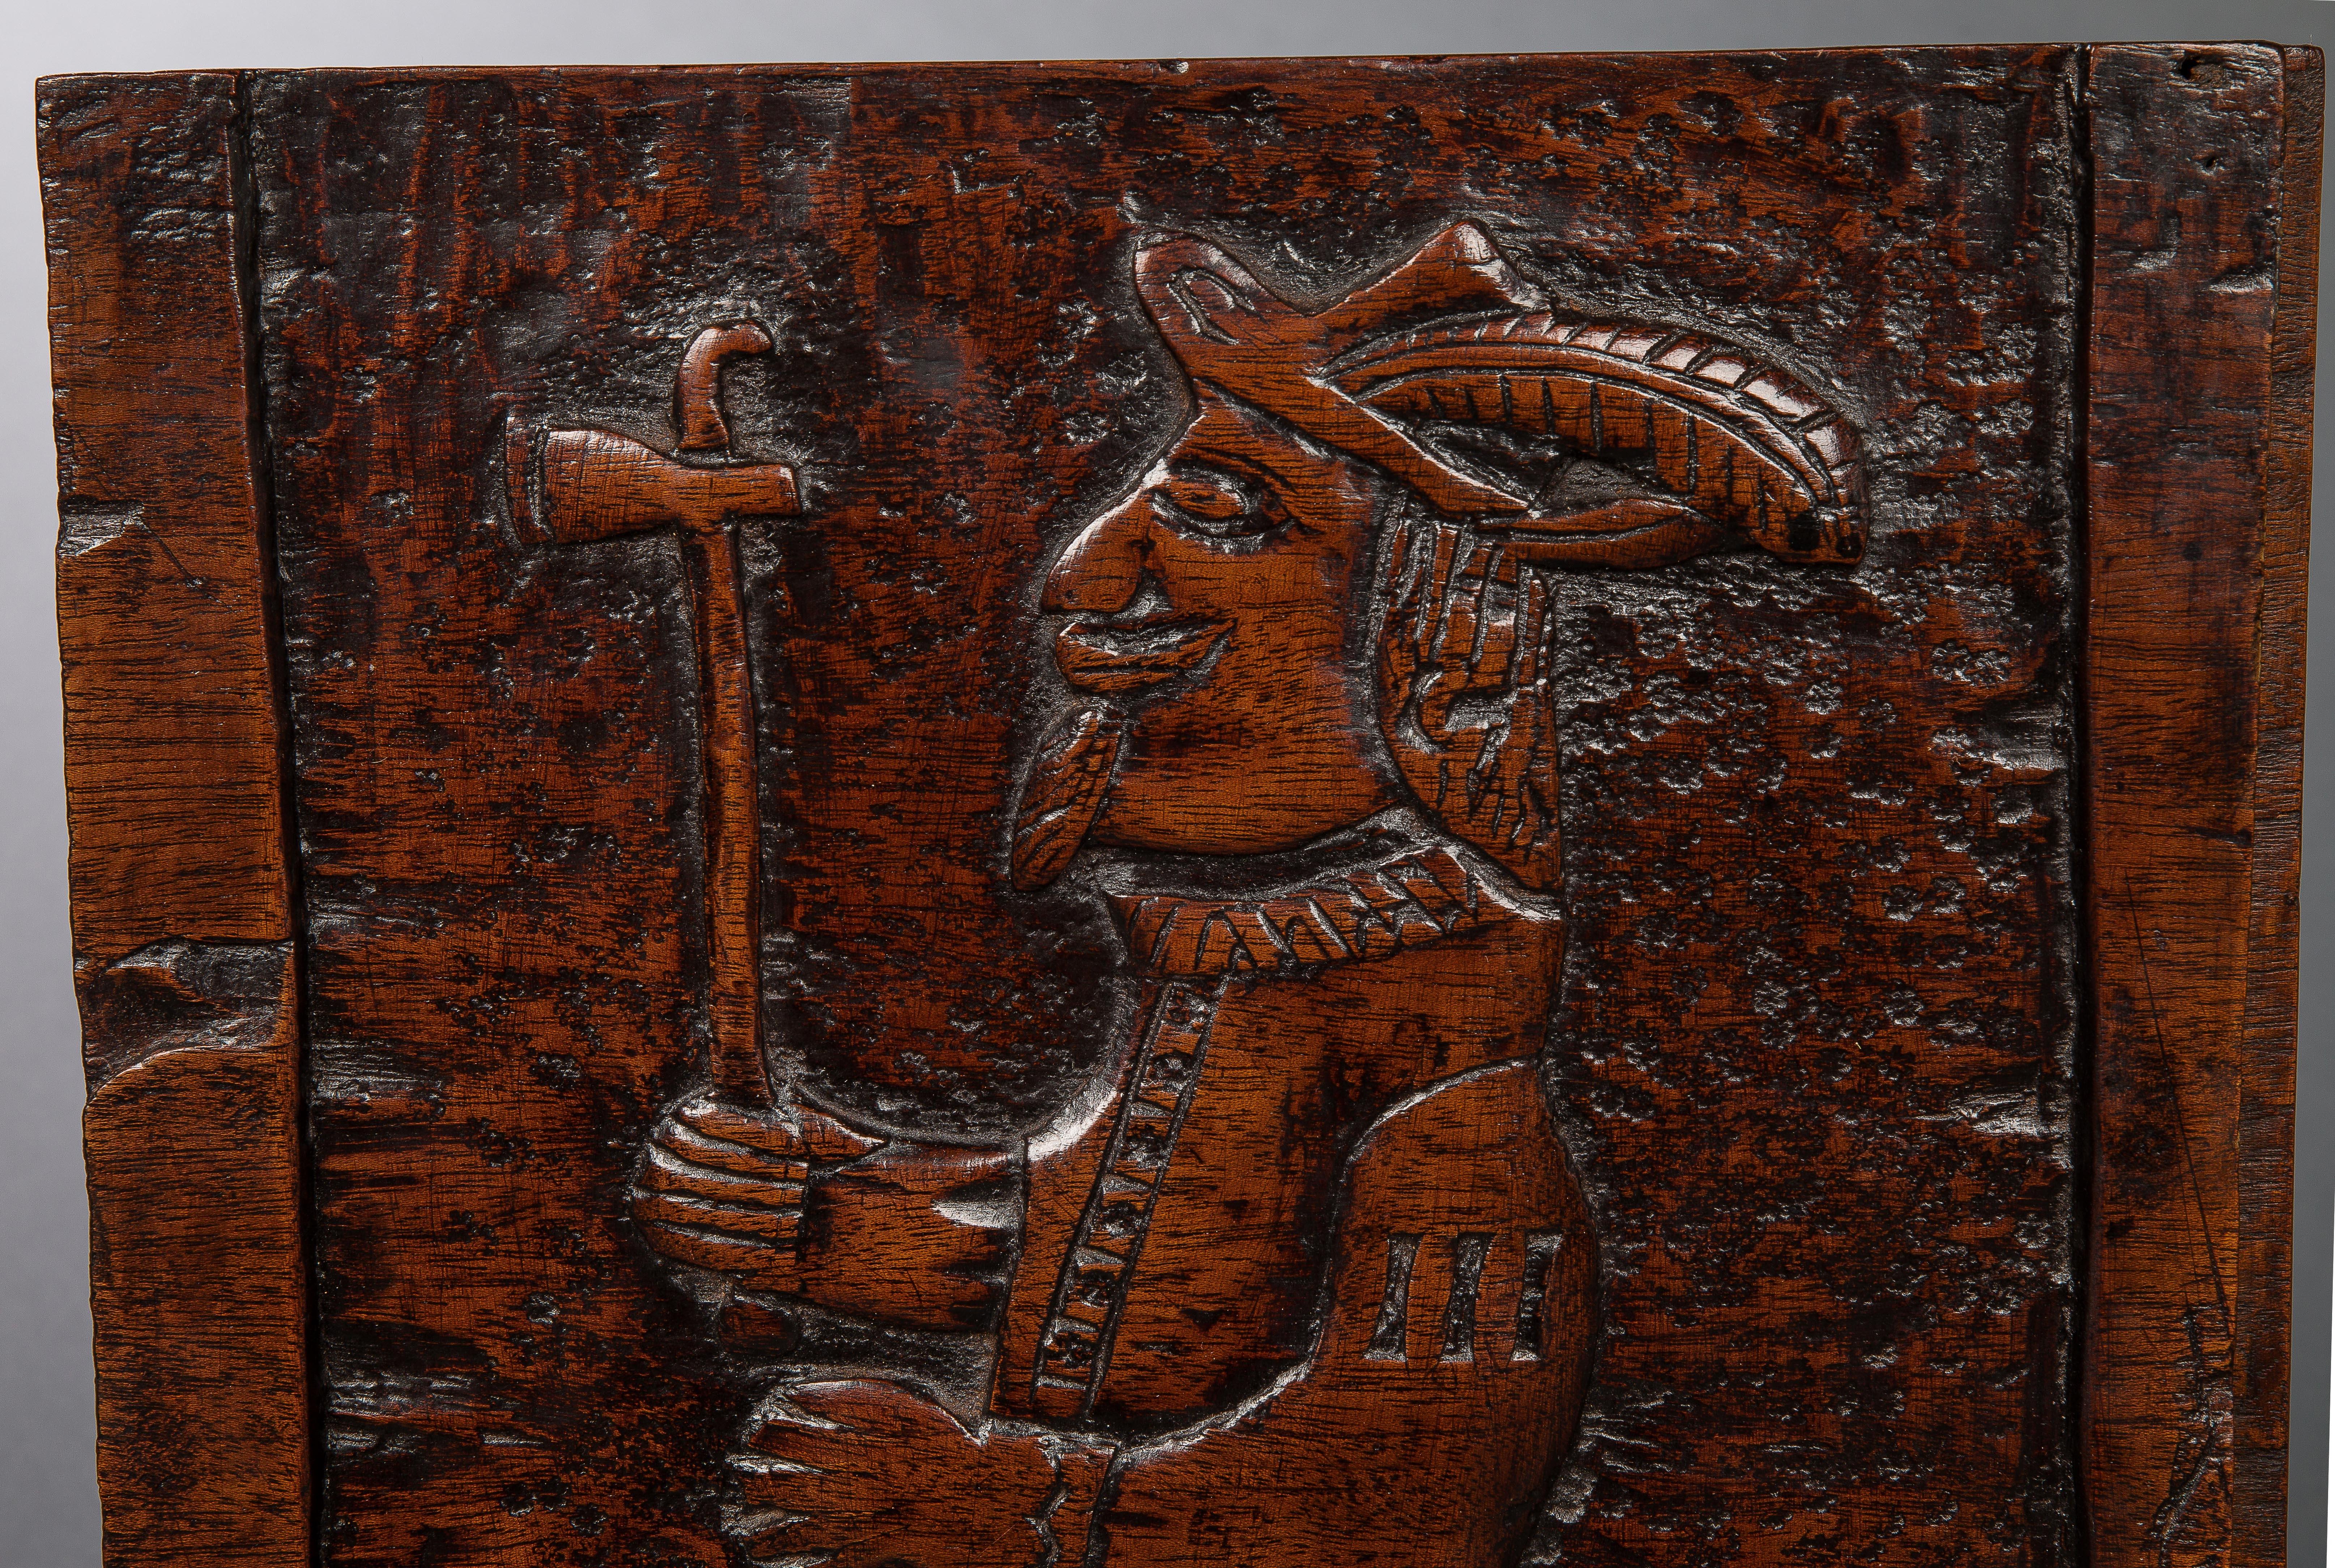 Possibly unique this thick mahogany panel depicts a European in late 16th or early 17th century costume with plumed hat brandishing a tomahawk on a background of punch work. The Algonquin Indians, pre-European colonization, developed the tomahawk, a